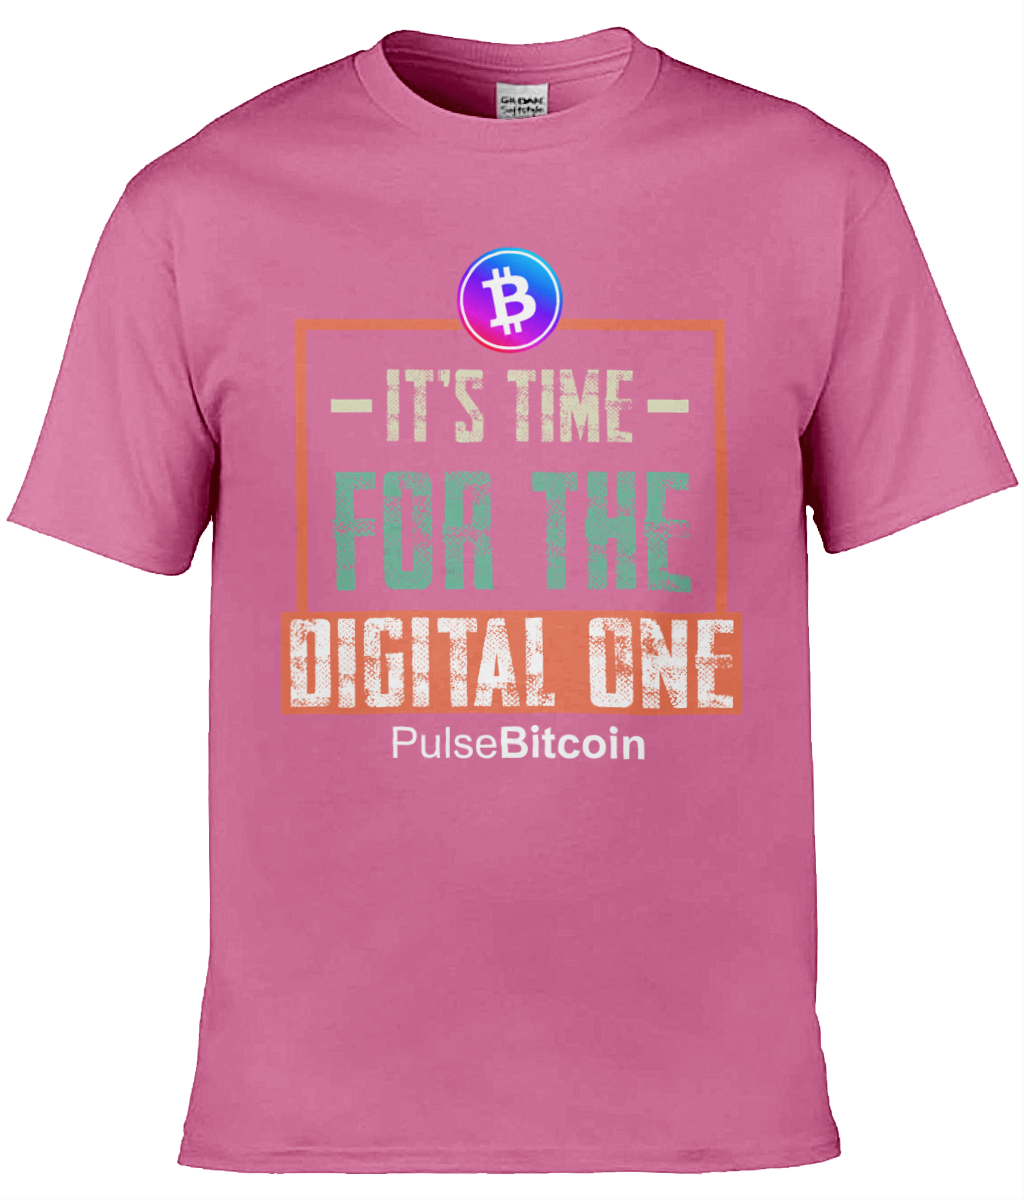 It's Time for The Digital One T-shirt, PulseBitcoin Unisex T-shirt